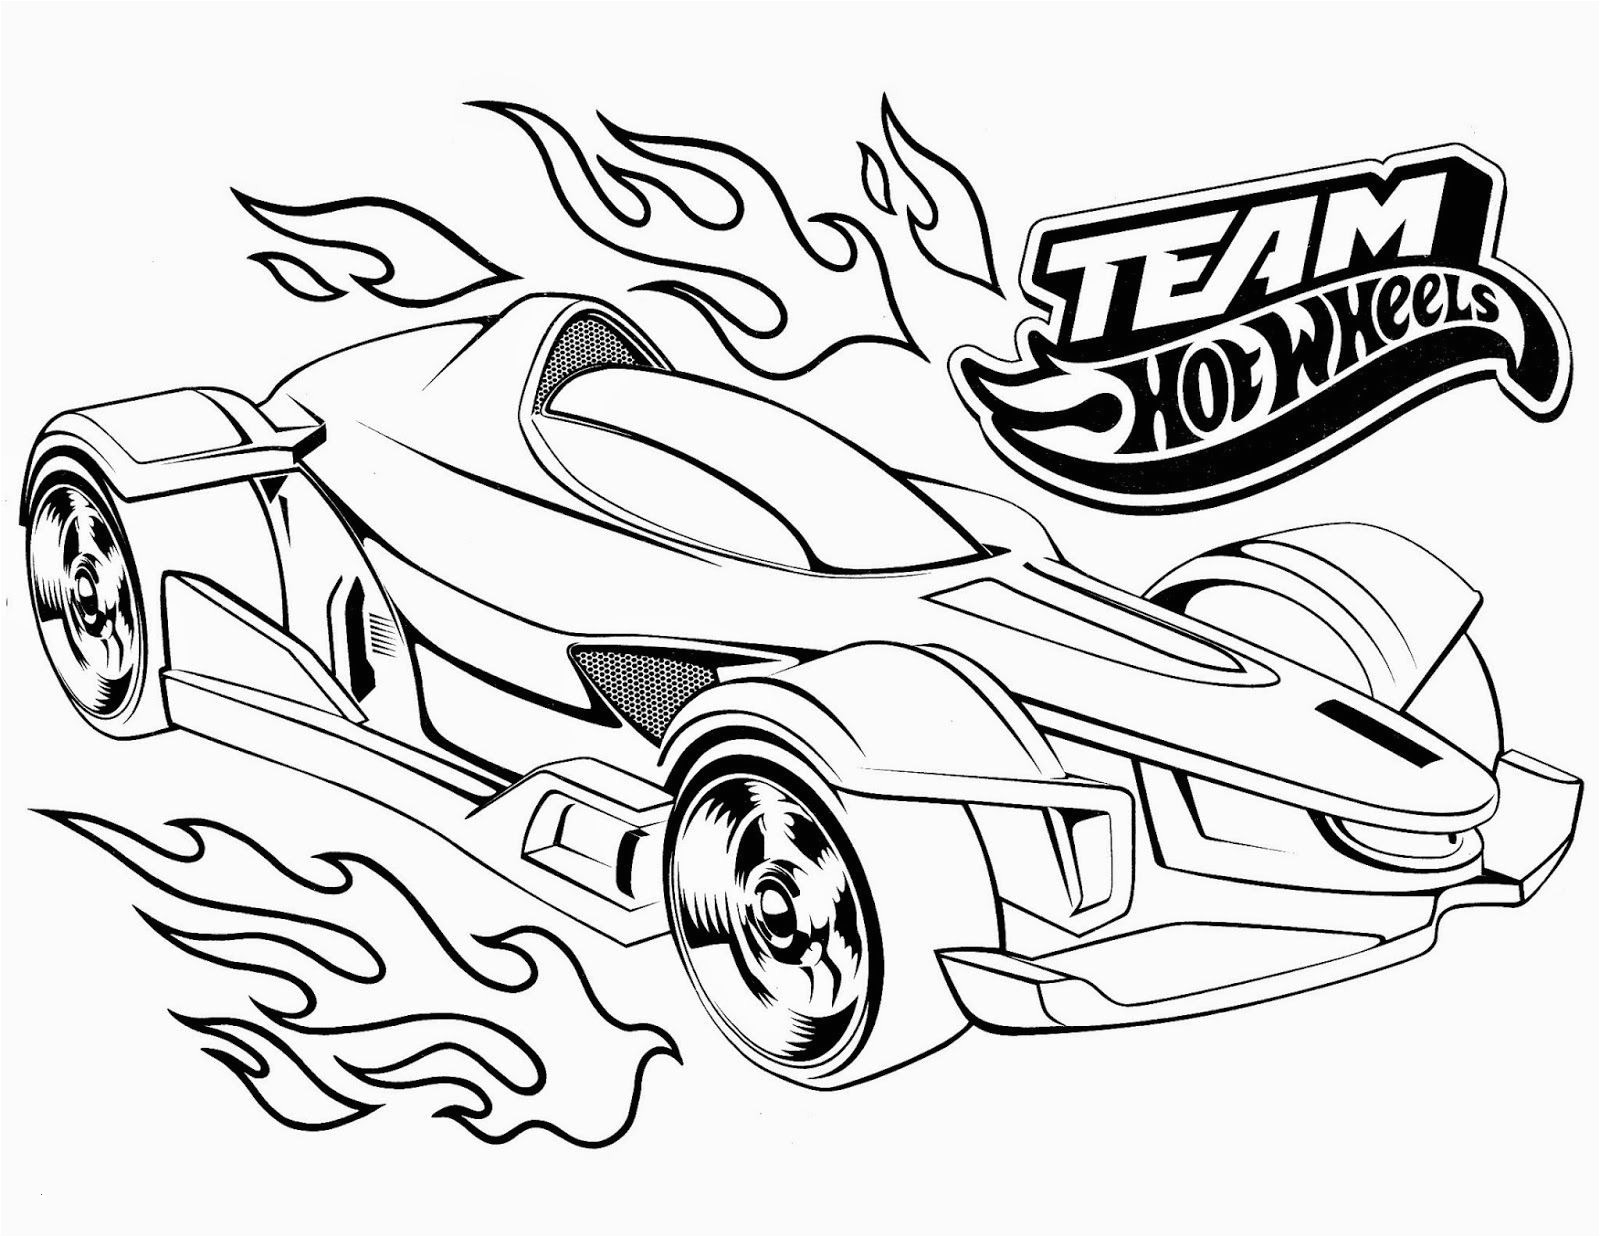 Hot Rod Coloring Pages to Print Luxury Hot Wheels Racing League Hot Wheels Coloring Pages Set